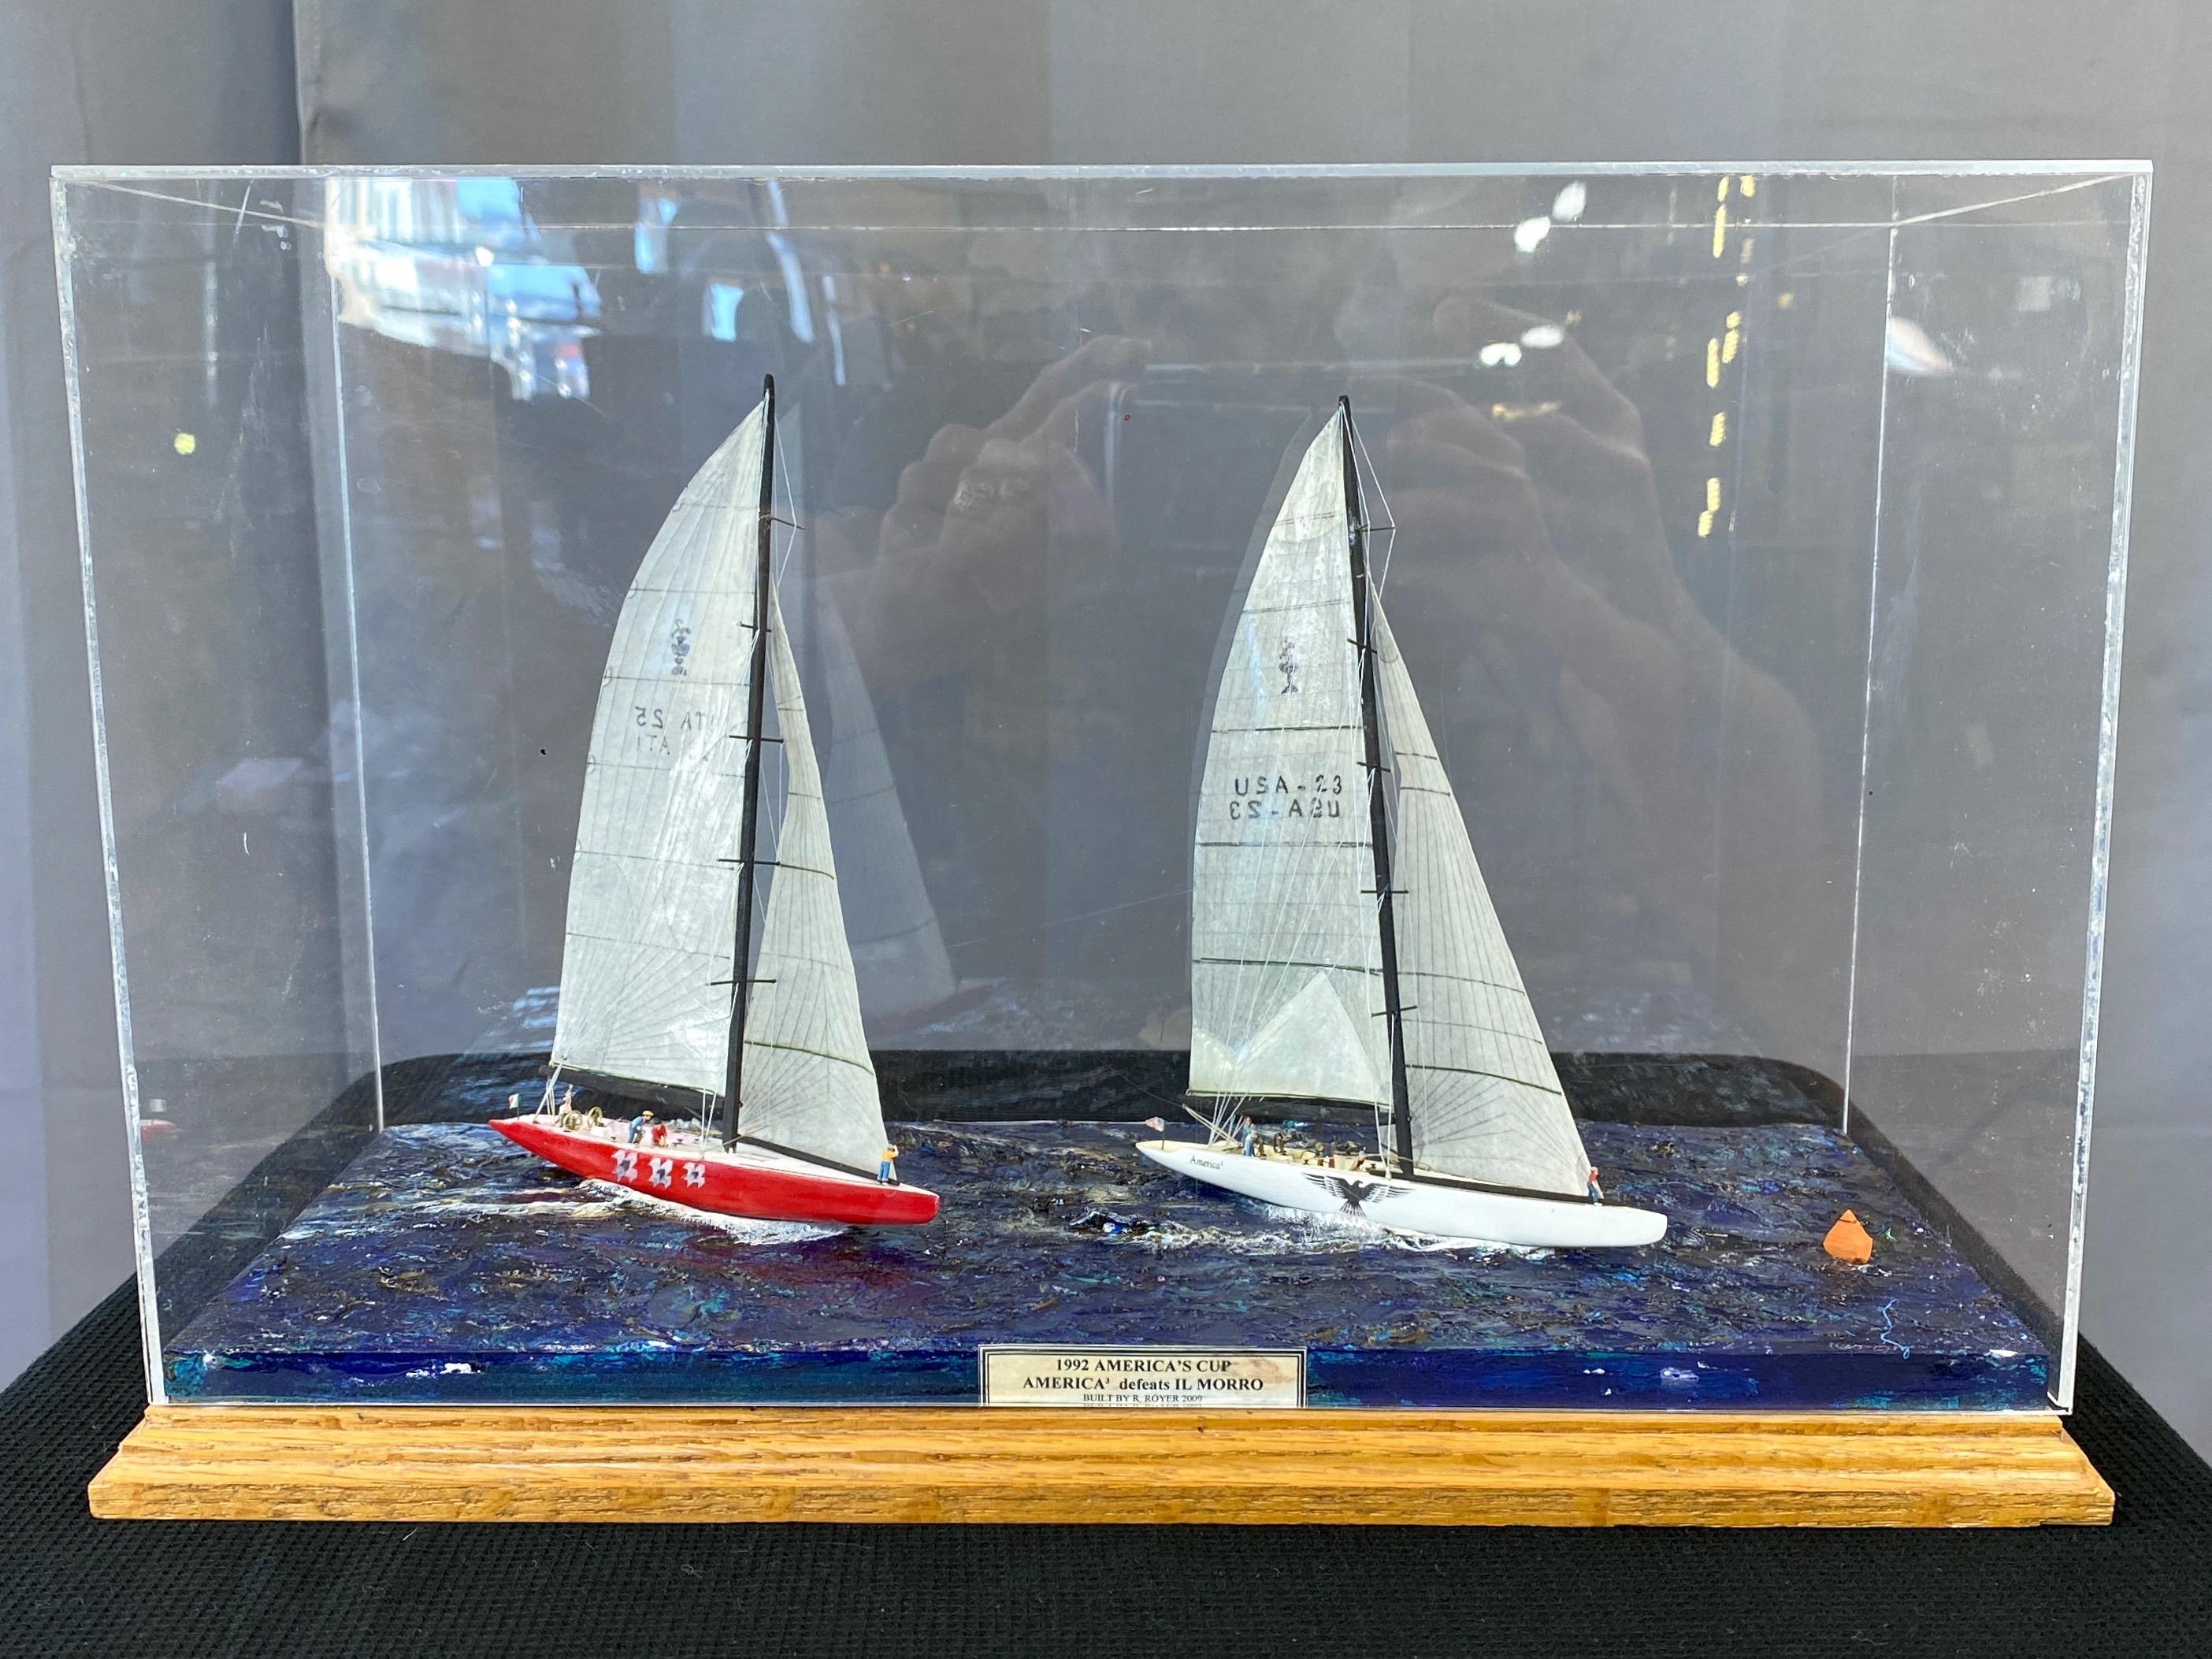 A highly detailed and dynamic hand-built diorama by R. Royer depicting an exciting moment from the 1992 28th America’s Cup between winning yacht America³ and her challenger Il Moro di Venezia.

Both racers are finely crafted and faithfully